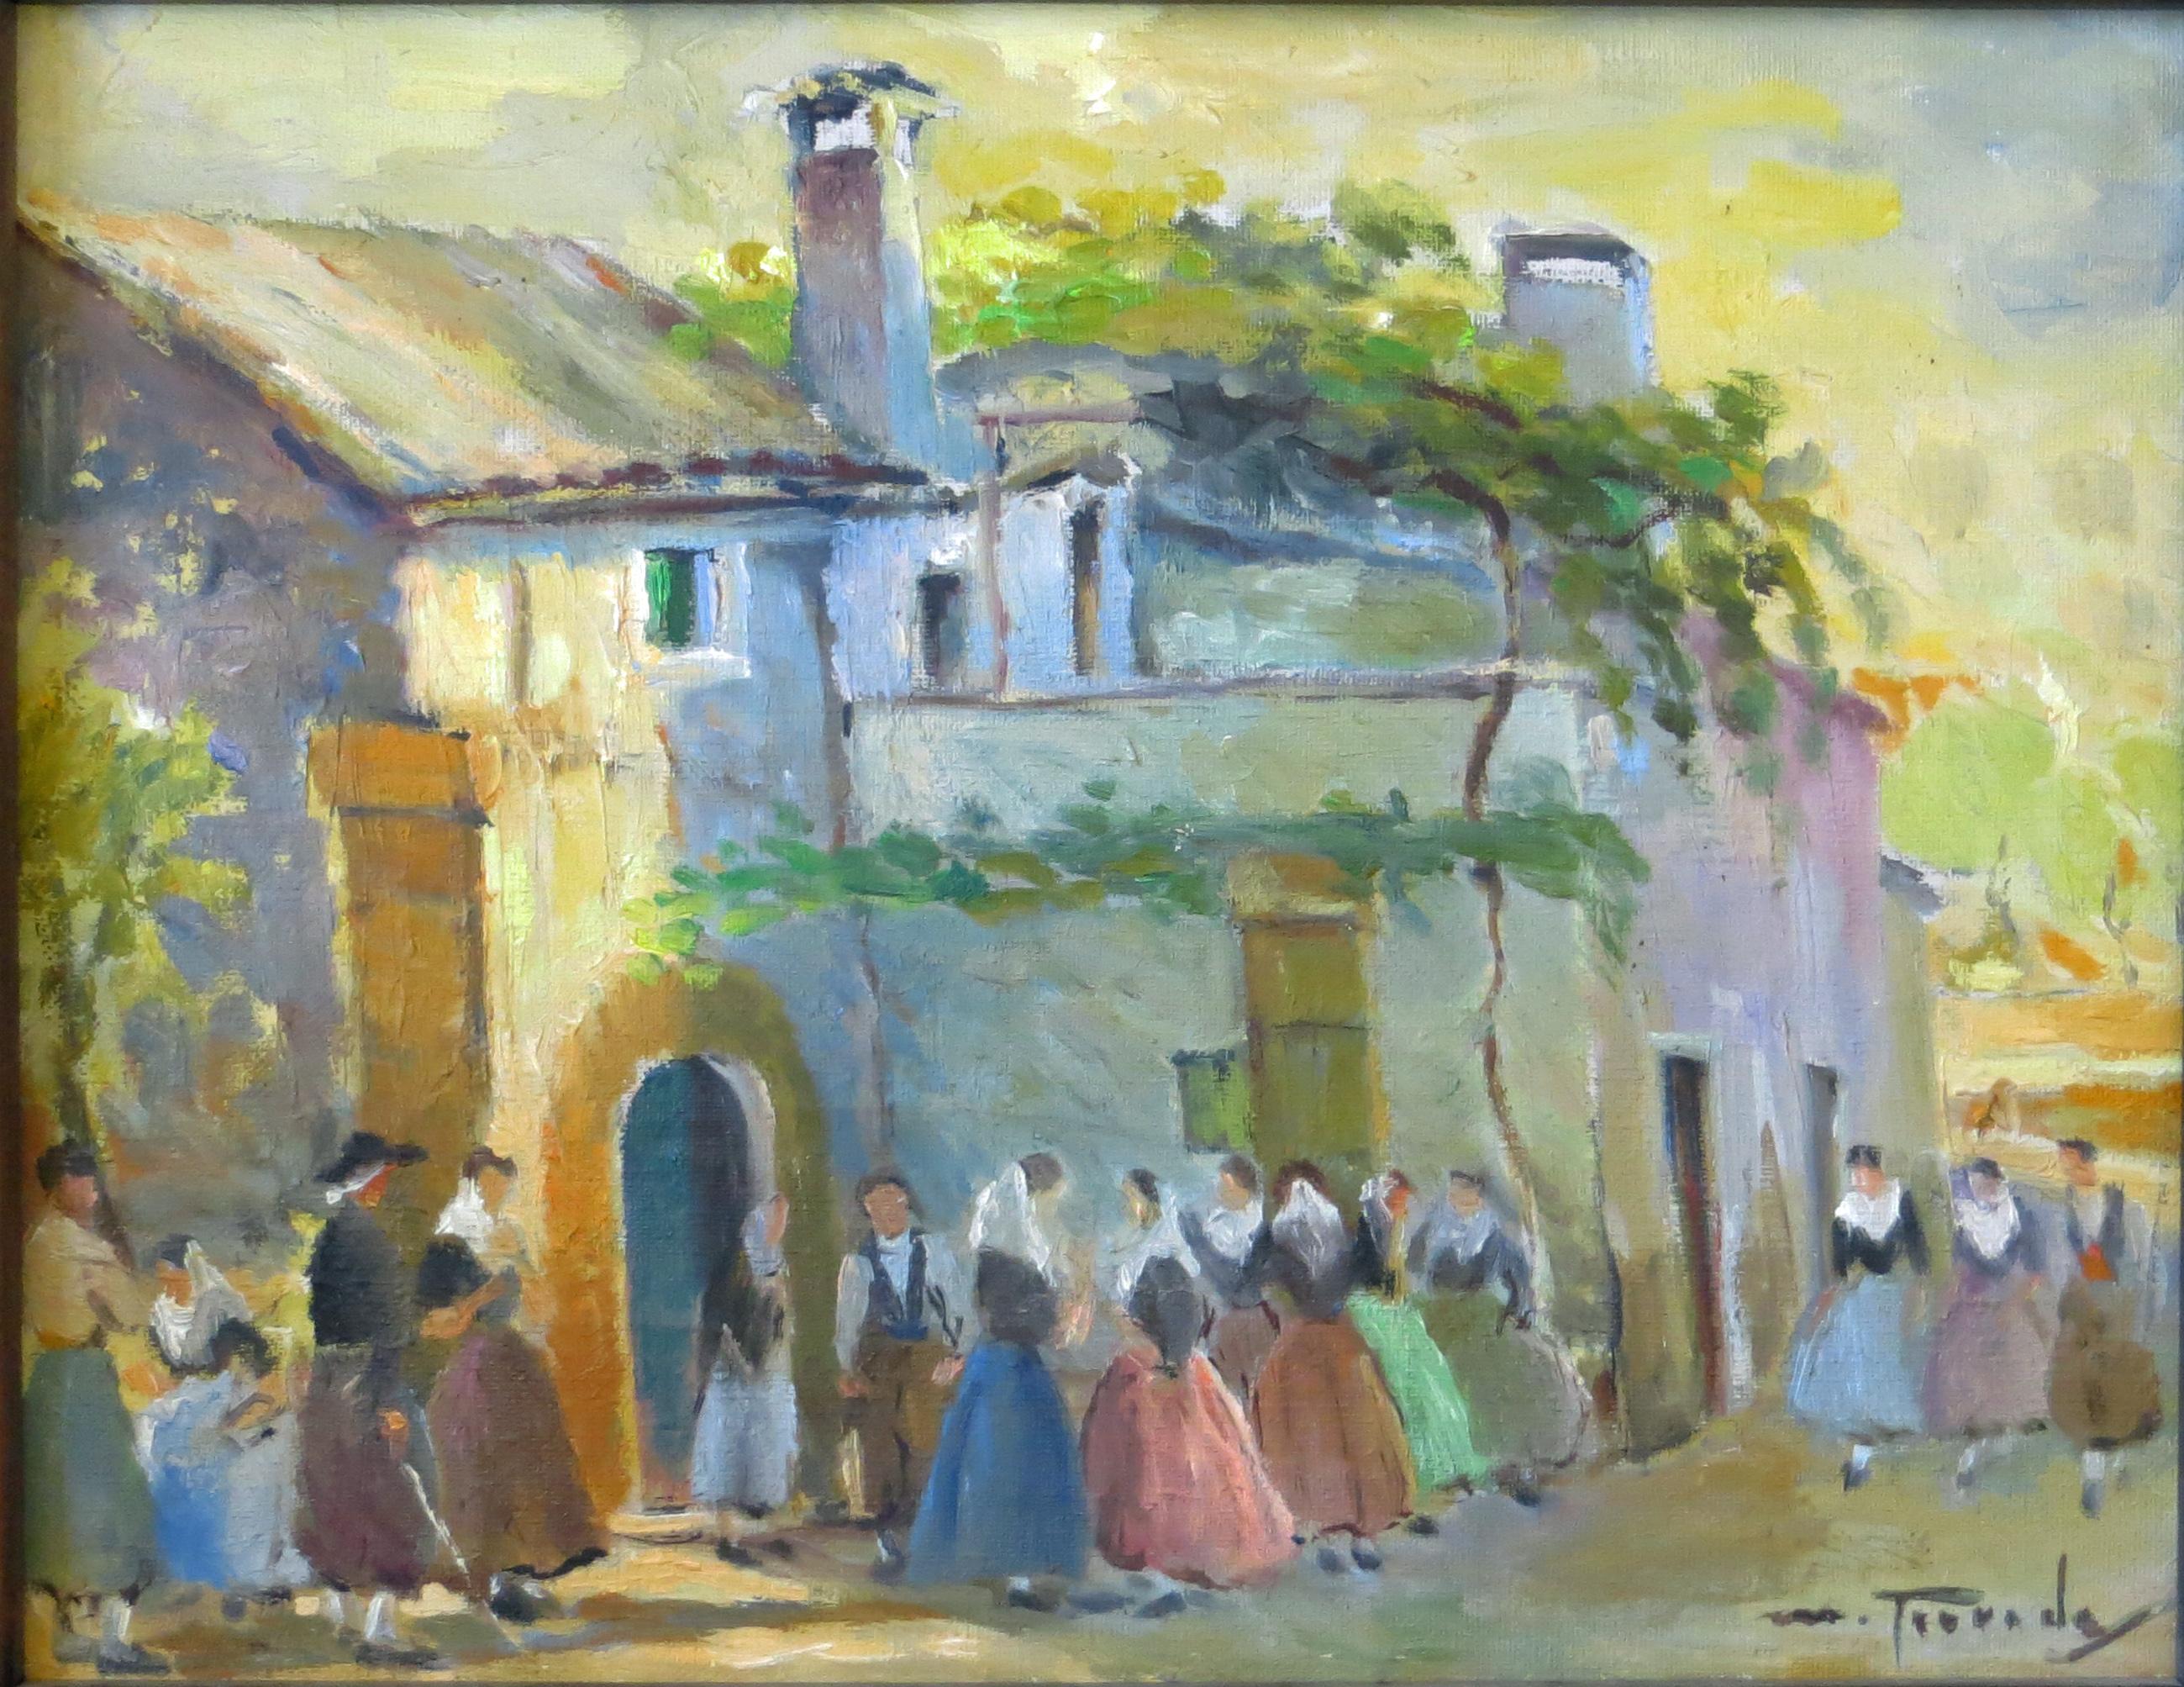 This beautiful painting depicts country life in the town of Andraitx in Mallorca. The painting is by Matias Terrades (1903-?), an artist who lived in the area. It is composed of oil on linen and measures 14”x18” (19.5”x23.5” framed). Judging by the